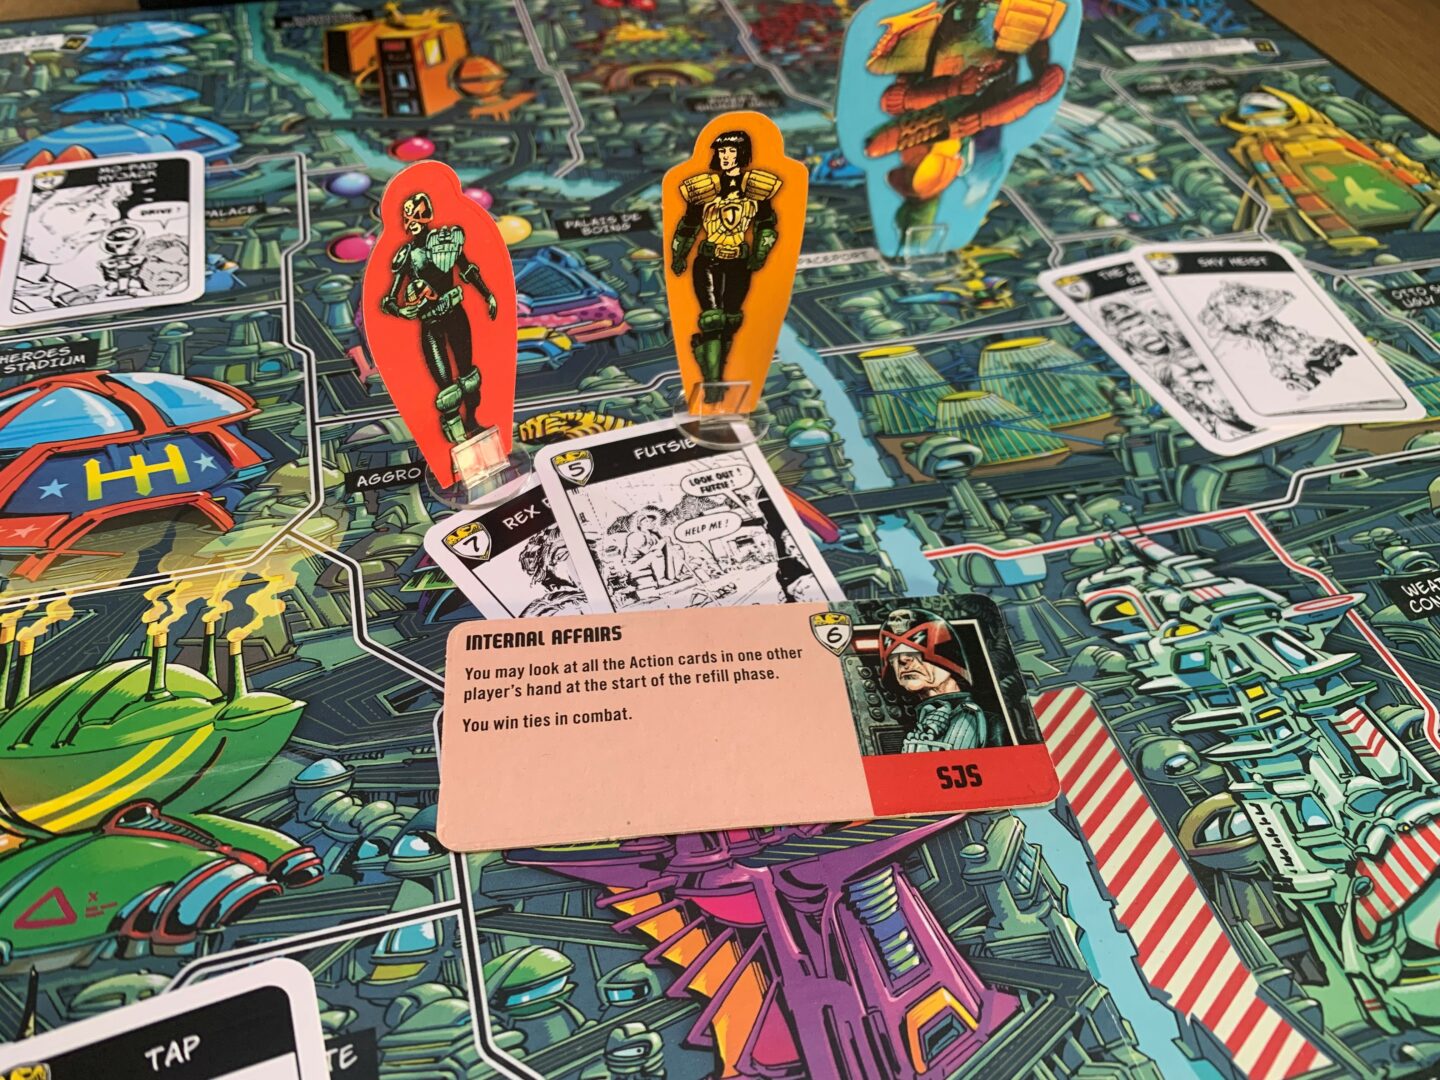 The SJS standee placed beside the Chief Judge standee on the Mega-City One map from Judge Dredd: The Game of Crime Fighting in Mega-City One.

In front of the Judges is a Crime and Perp card, as well as the Specialist Judge ability token that reads:
“Internal Affairs
You may look at all the Action cards in one other player’s hand at the start of the refill phase.
You win ties in combat.”
